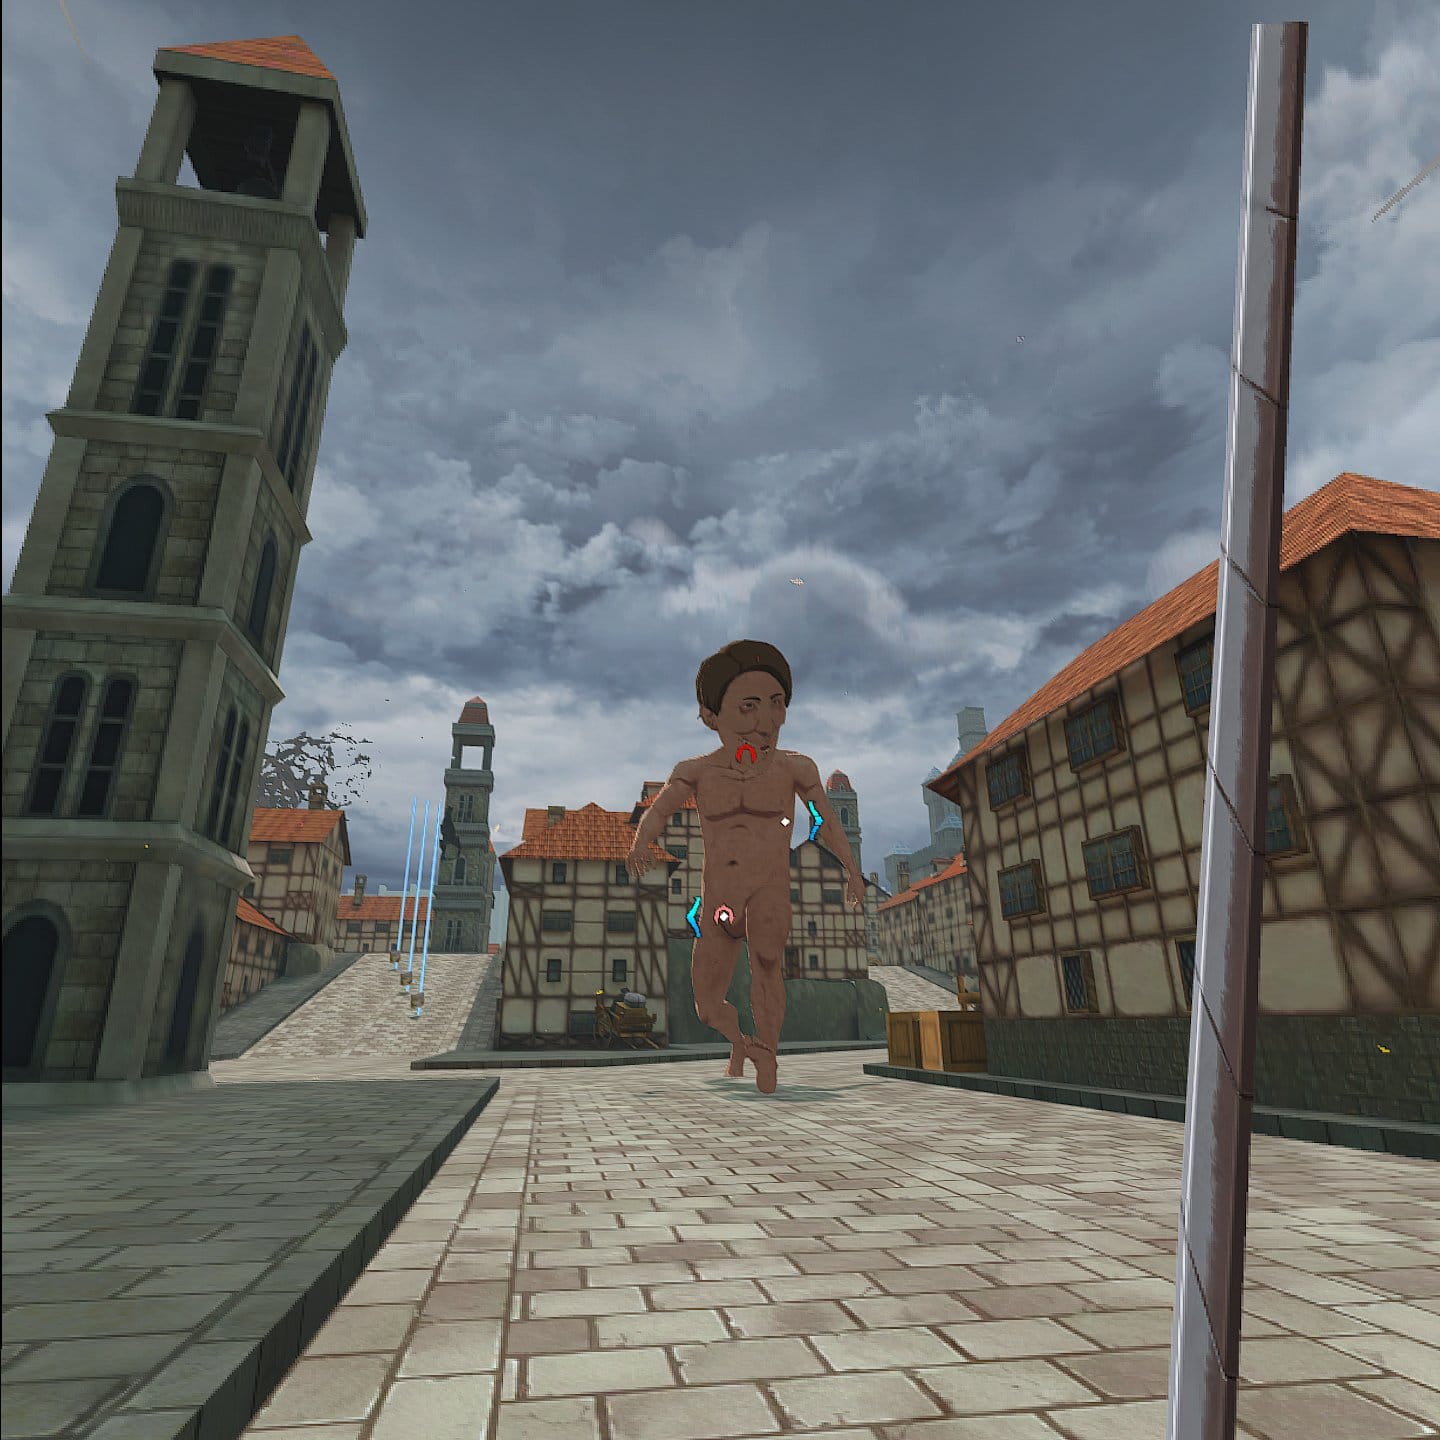 Attack on Titan VR: Unbreakable screenshot, shows you aiming your ODM at a nearby Titan